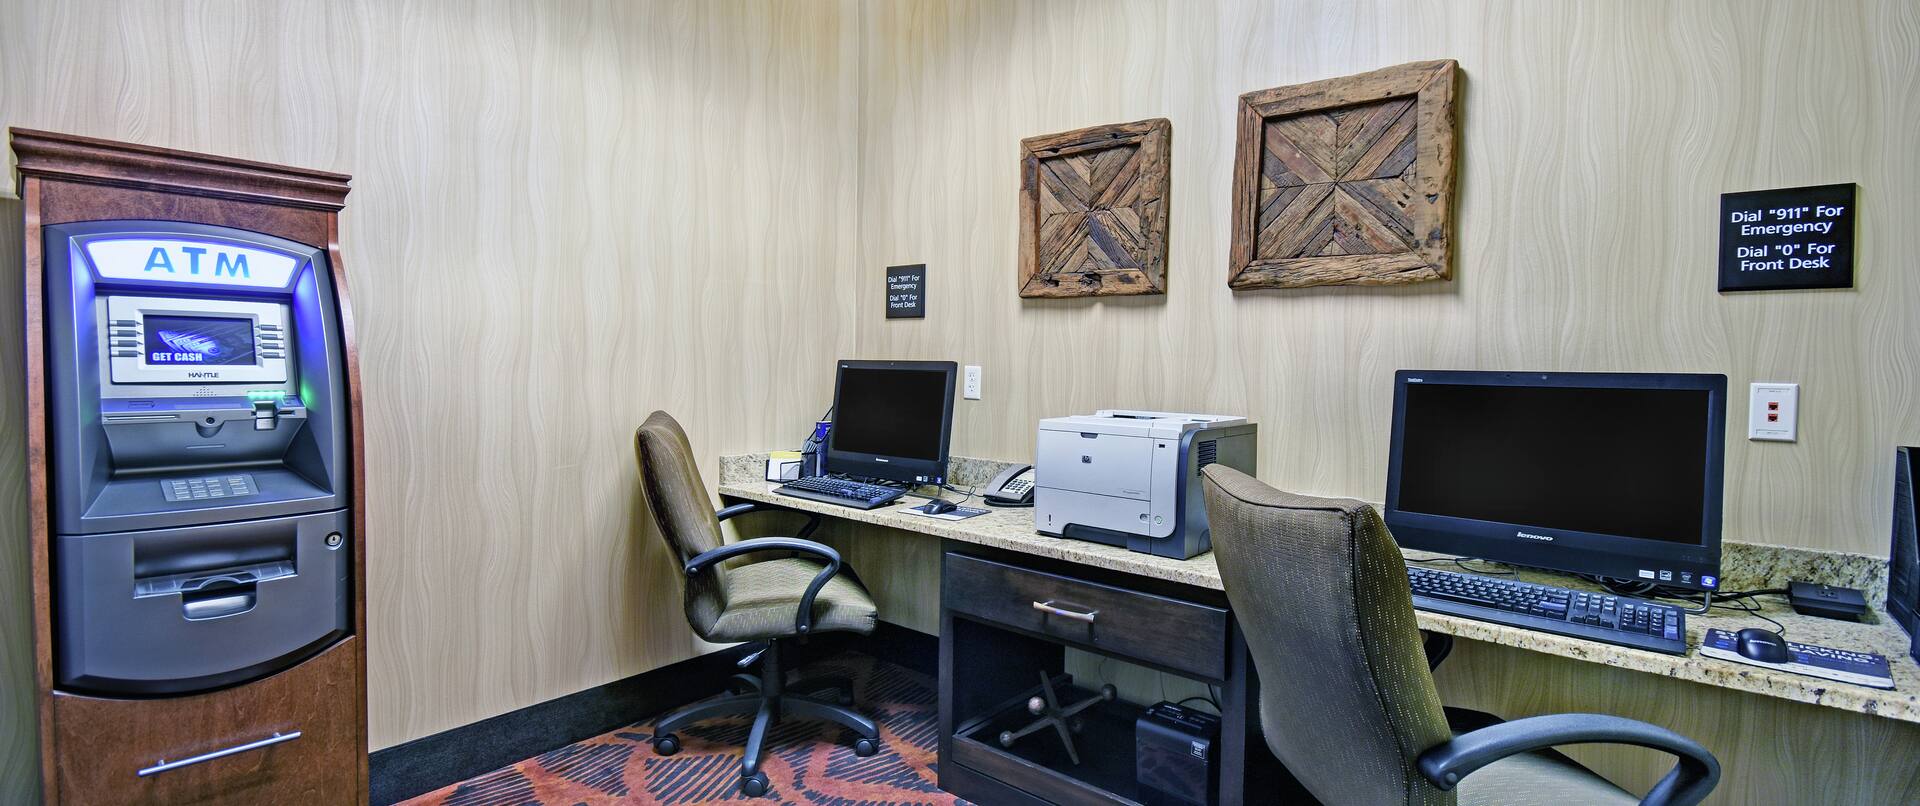 Business Center with ATM Machine 2 Computers and a Printer